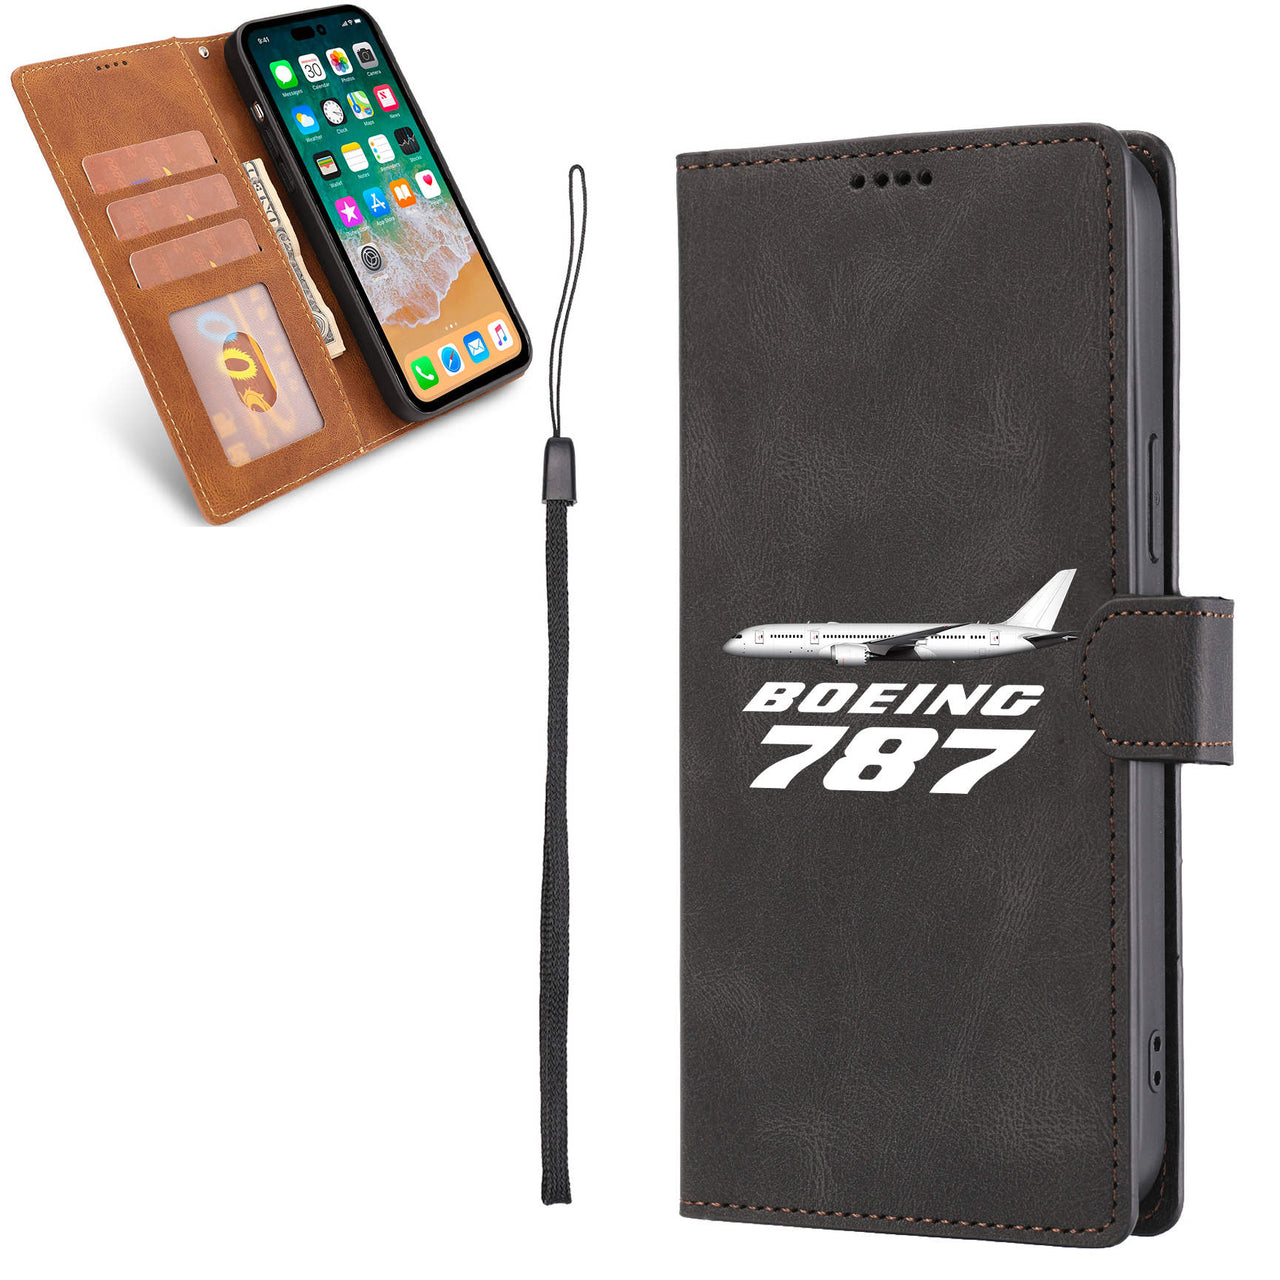 The Boeing 787 Designed Leather iPhone Cases